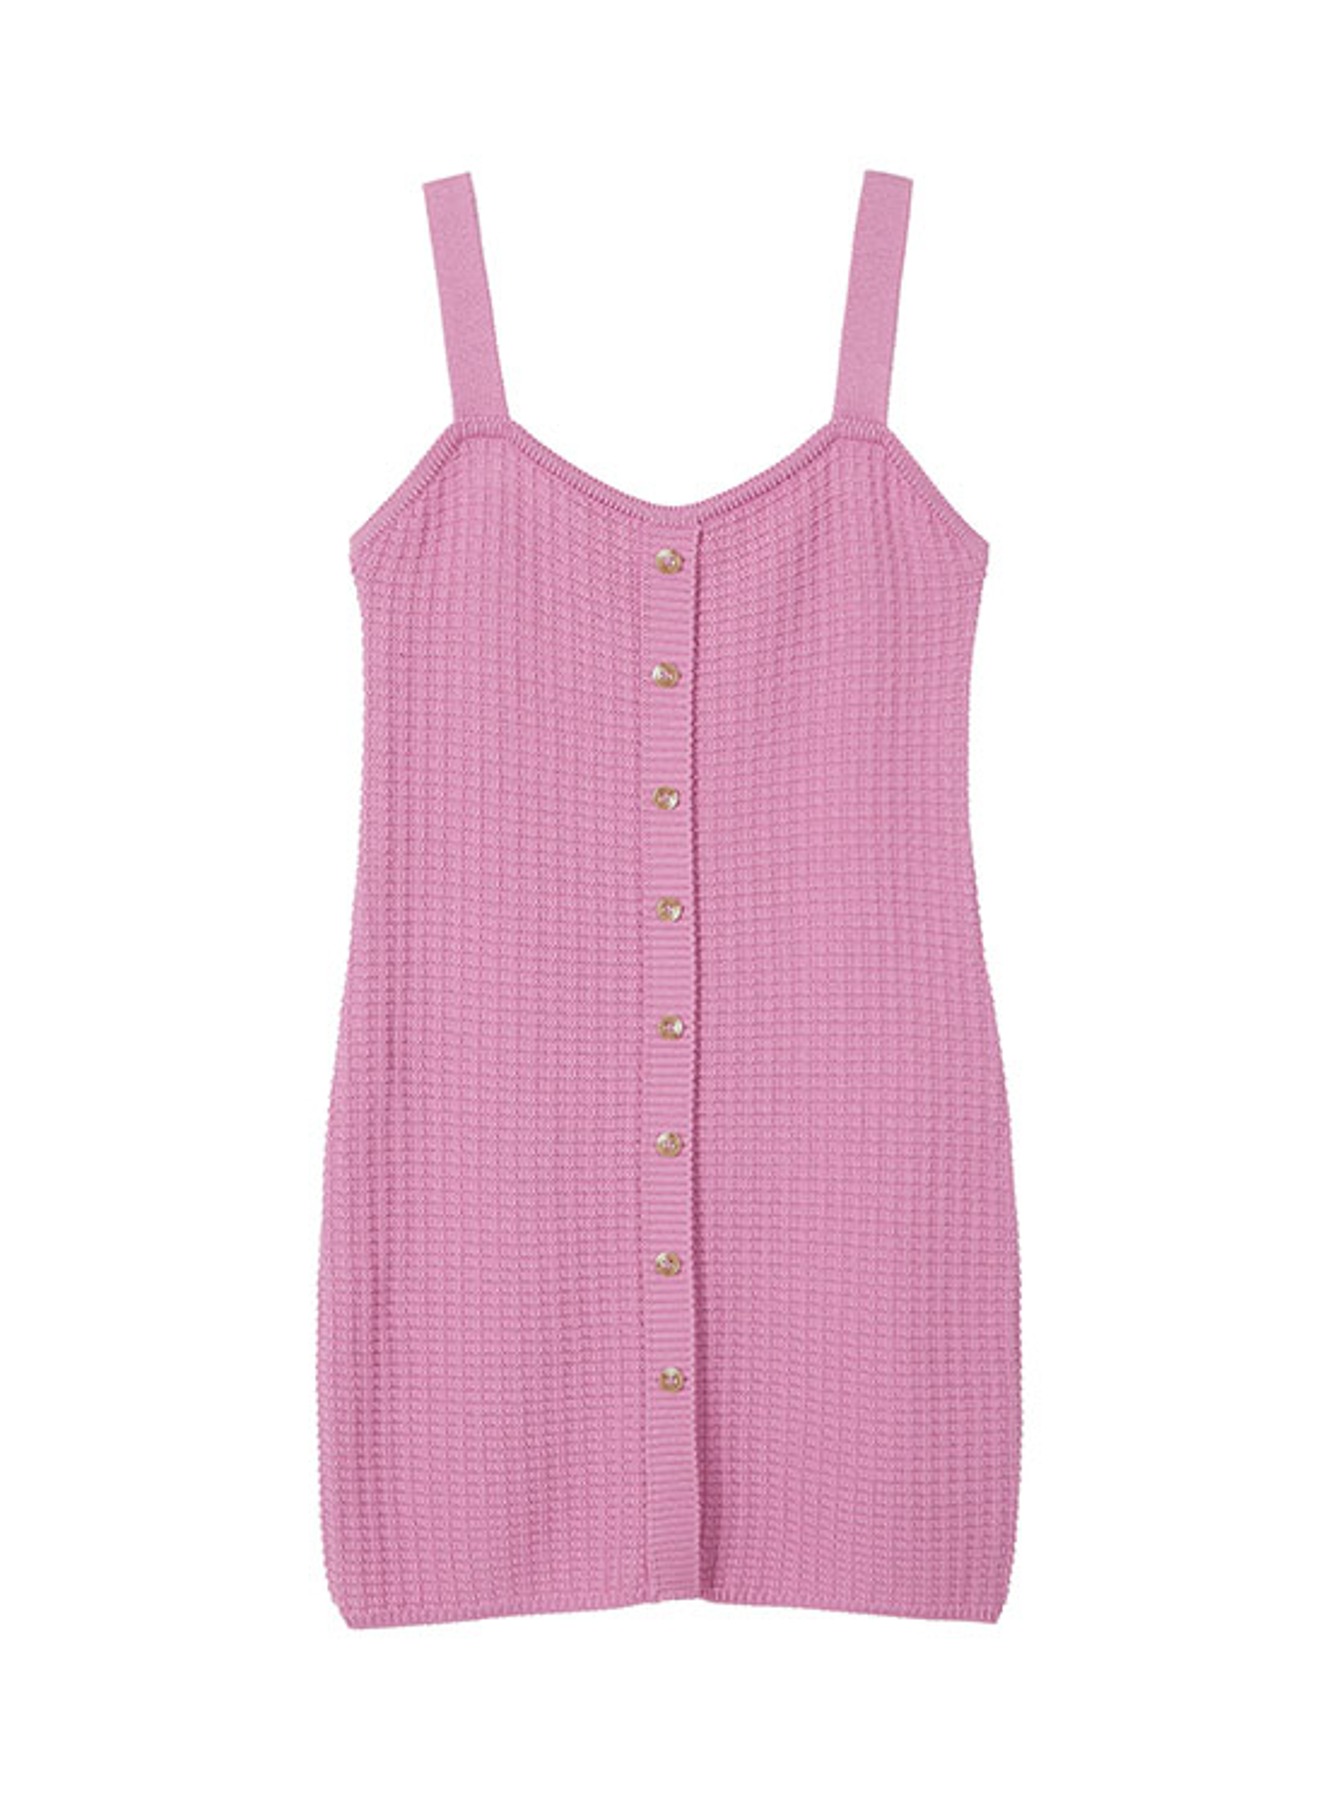 Knit Mini Onepiece in Pink VK3MO234-72